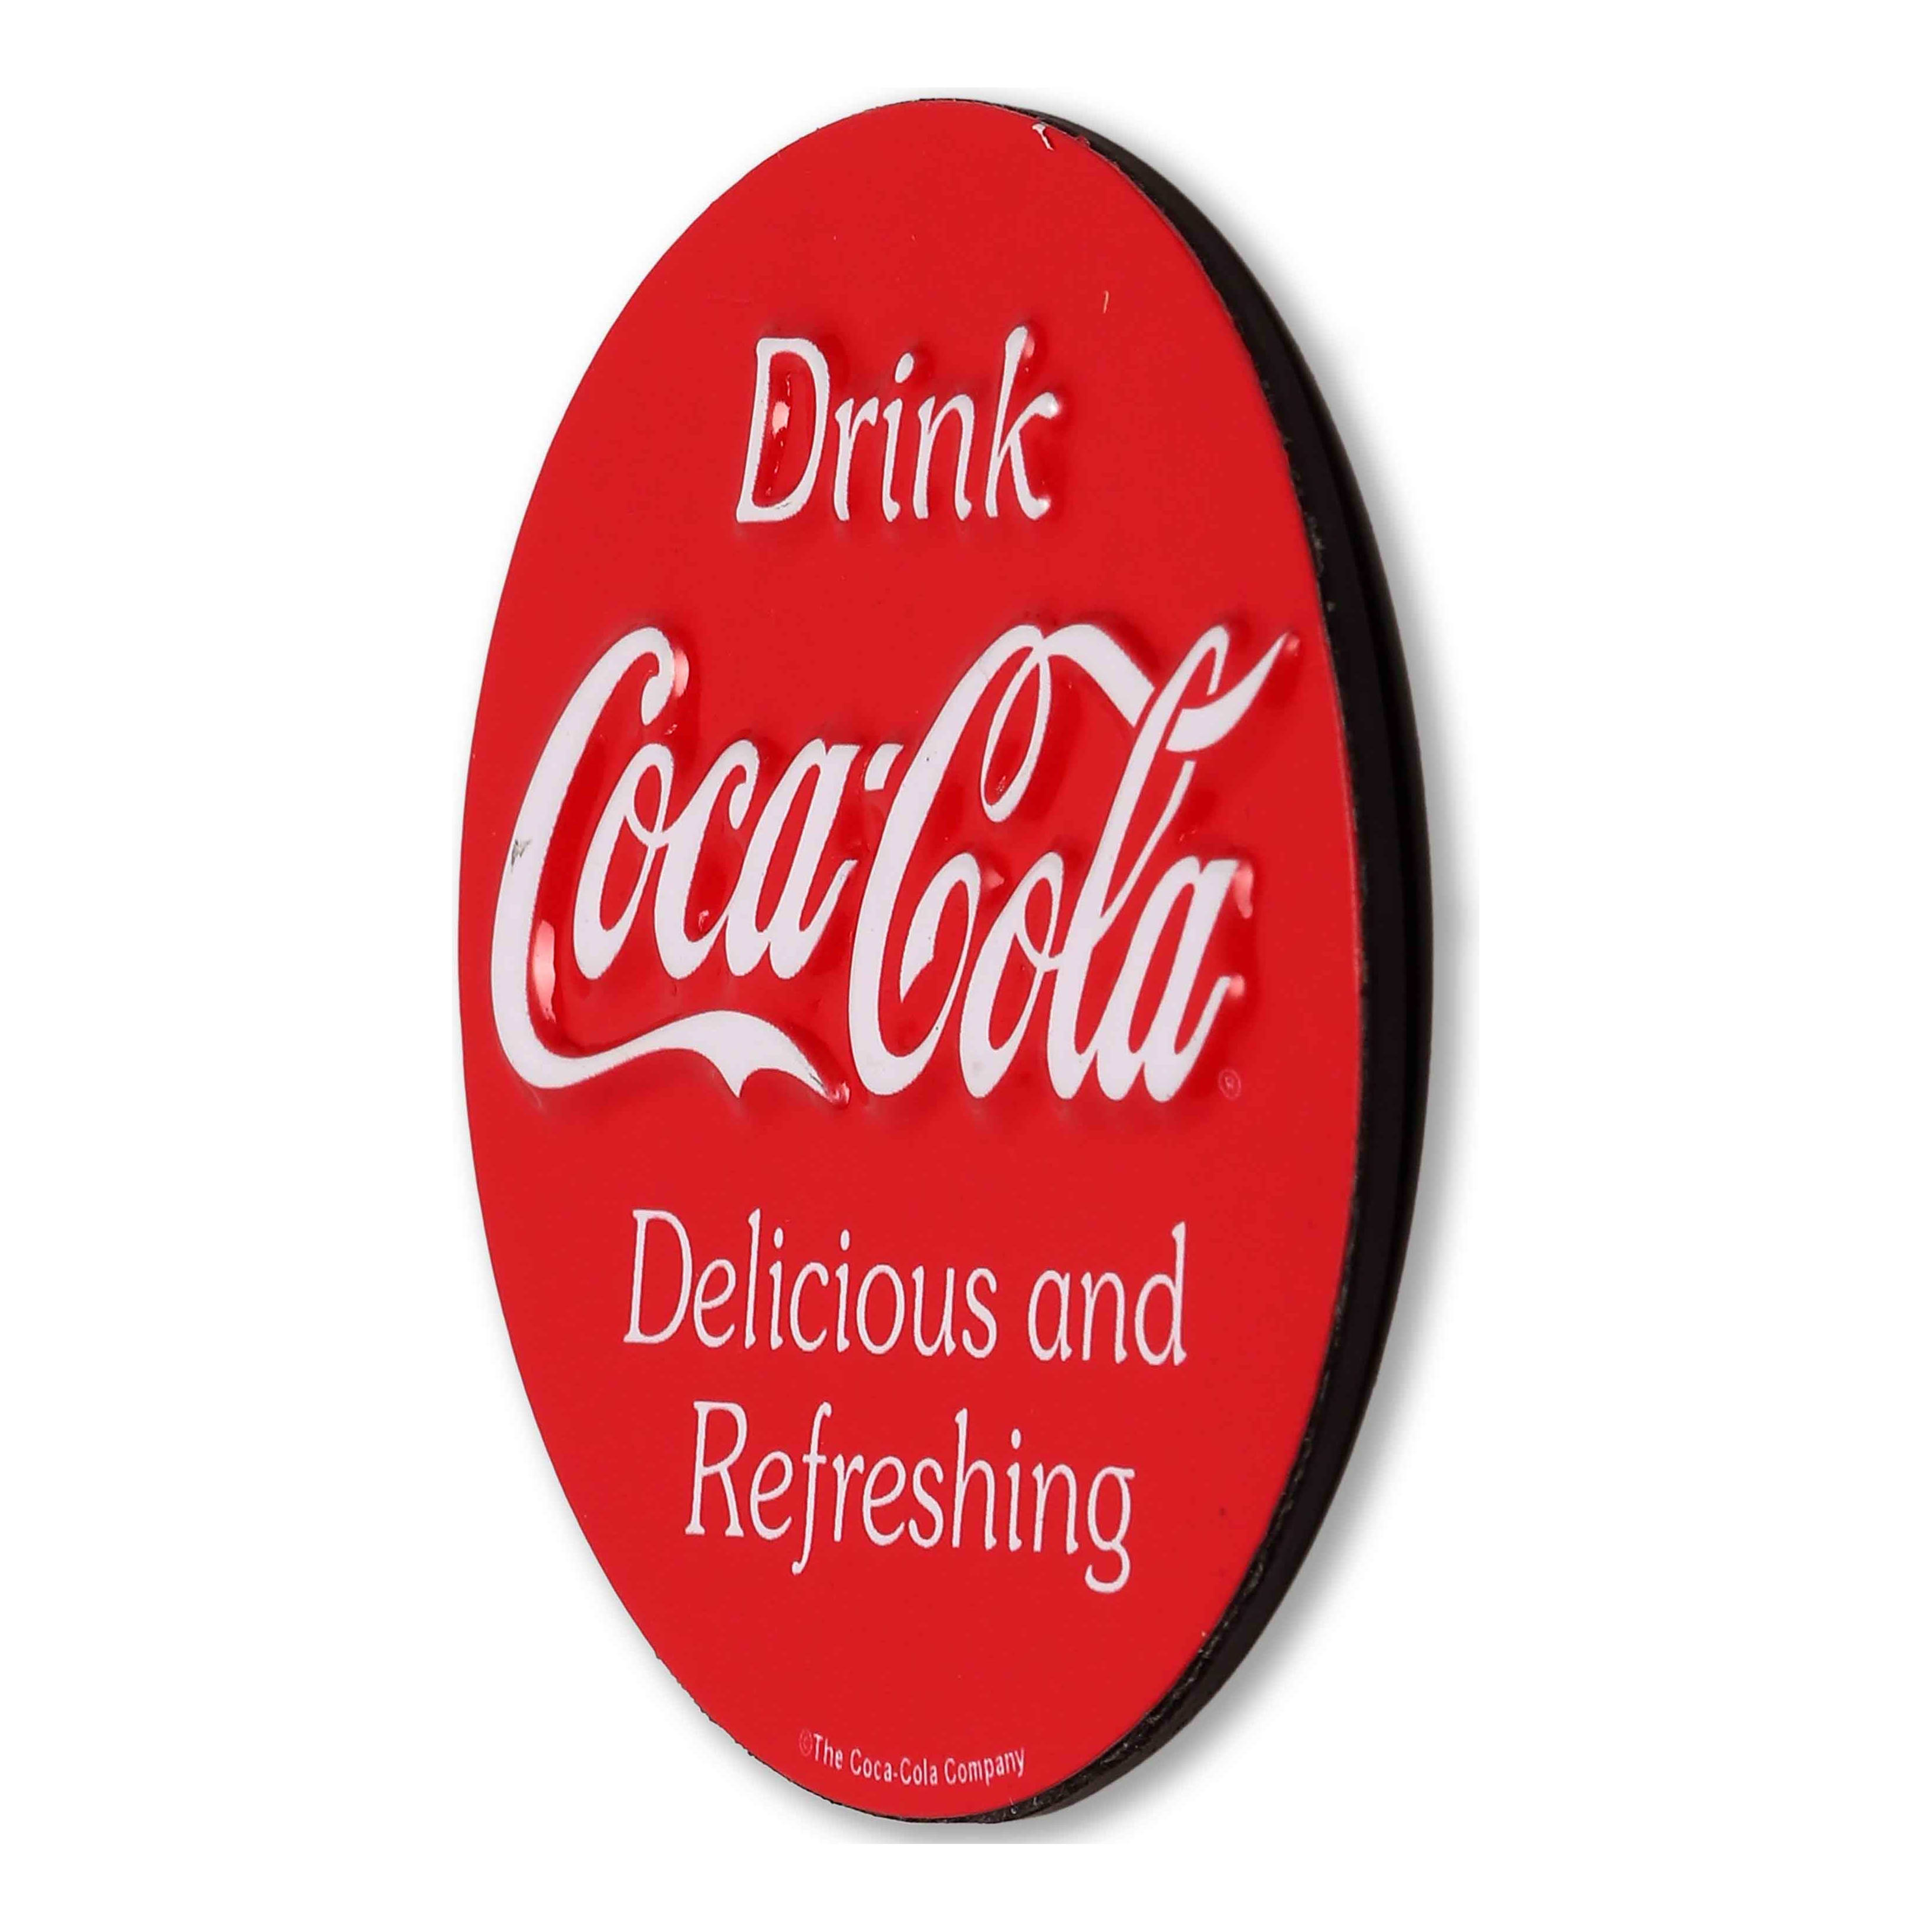 Open Road's Coca-Cola Delicious and Refreshing Round Metal Magnet